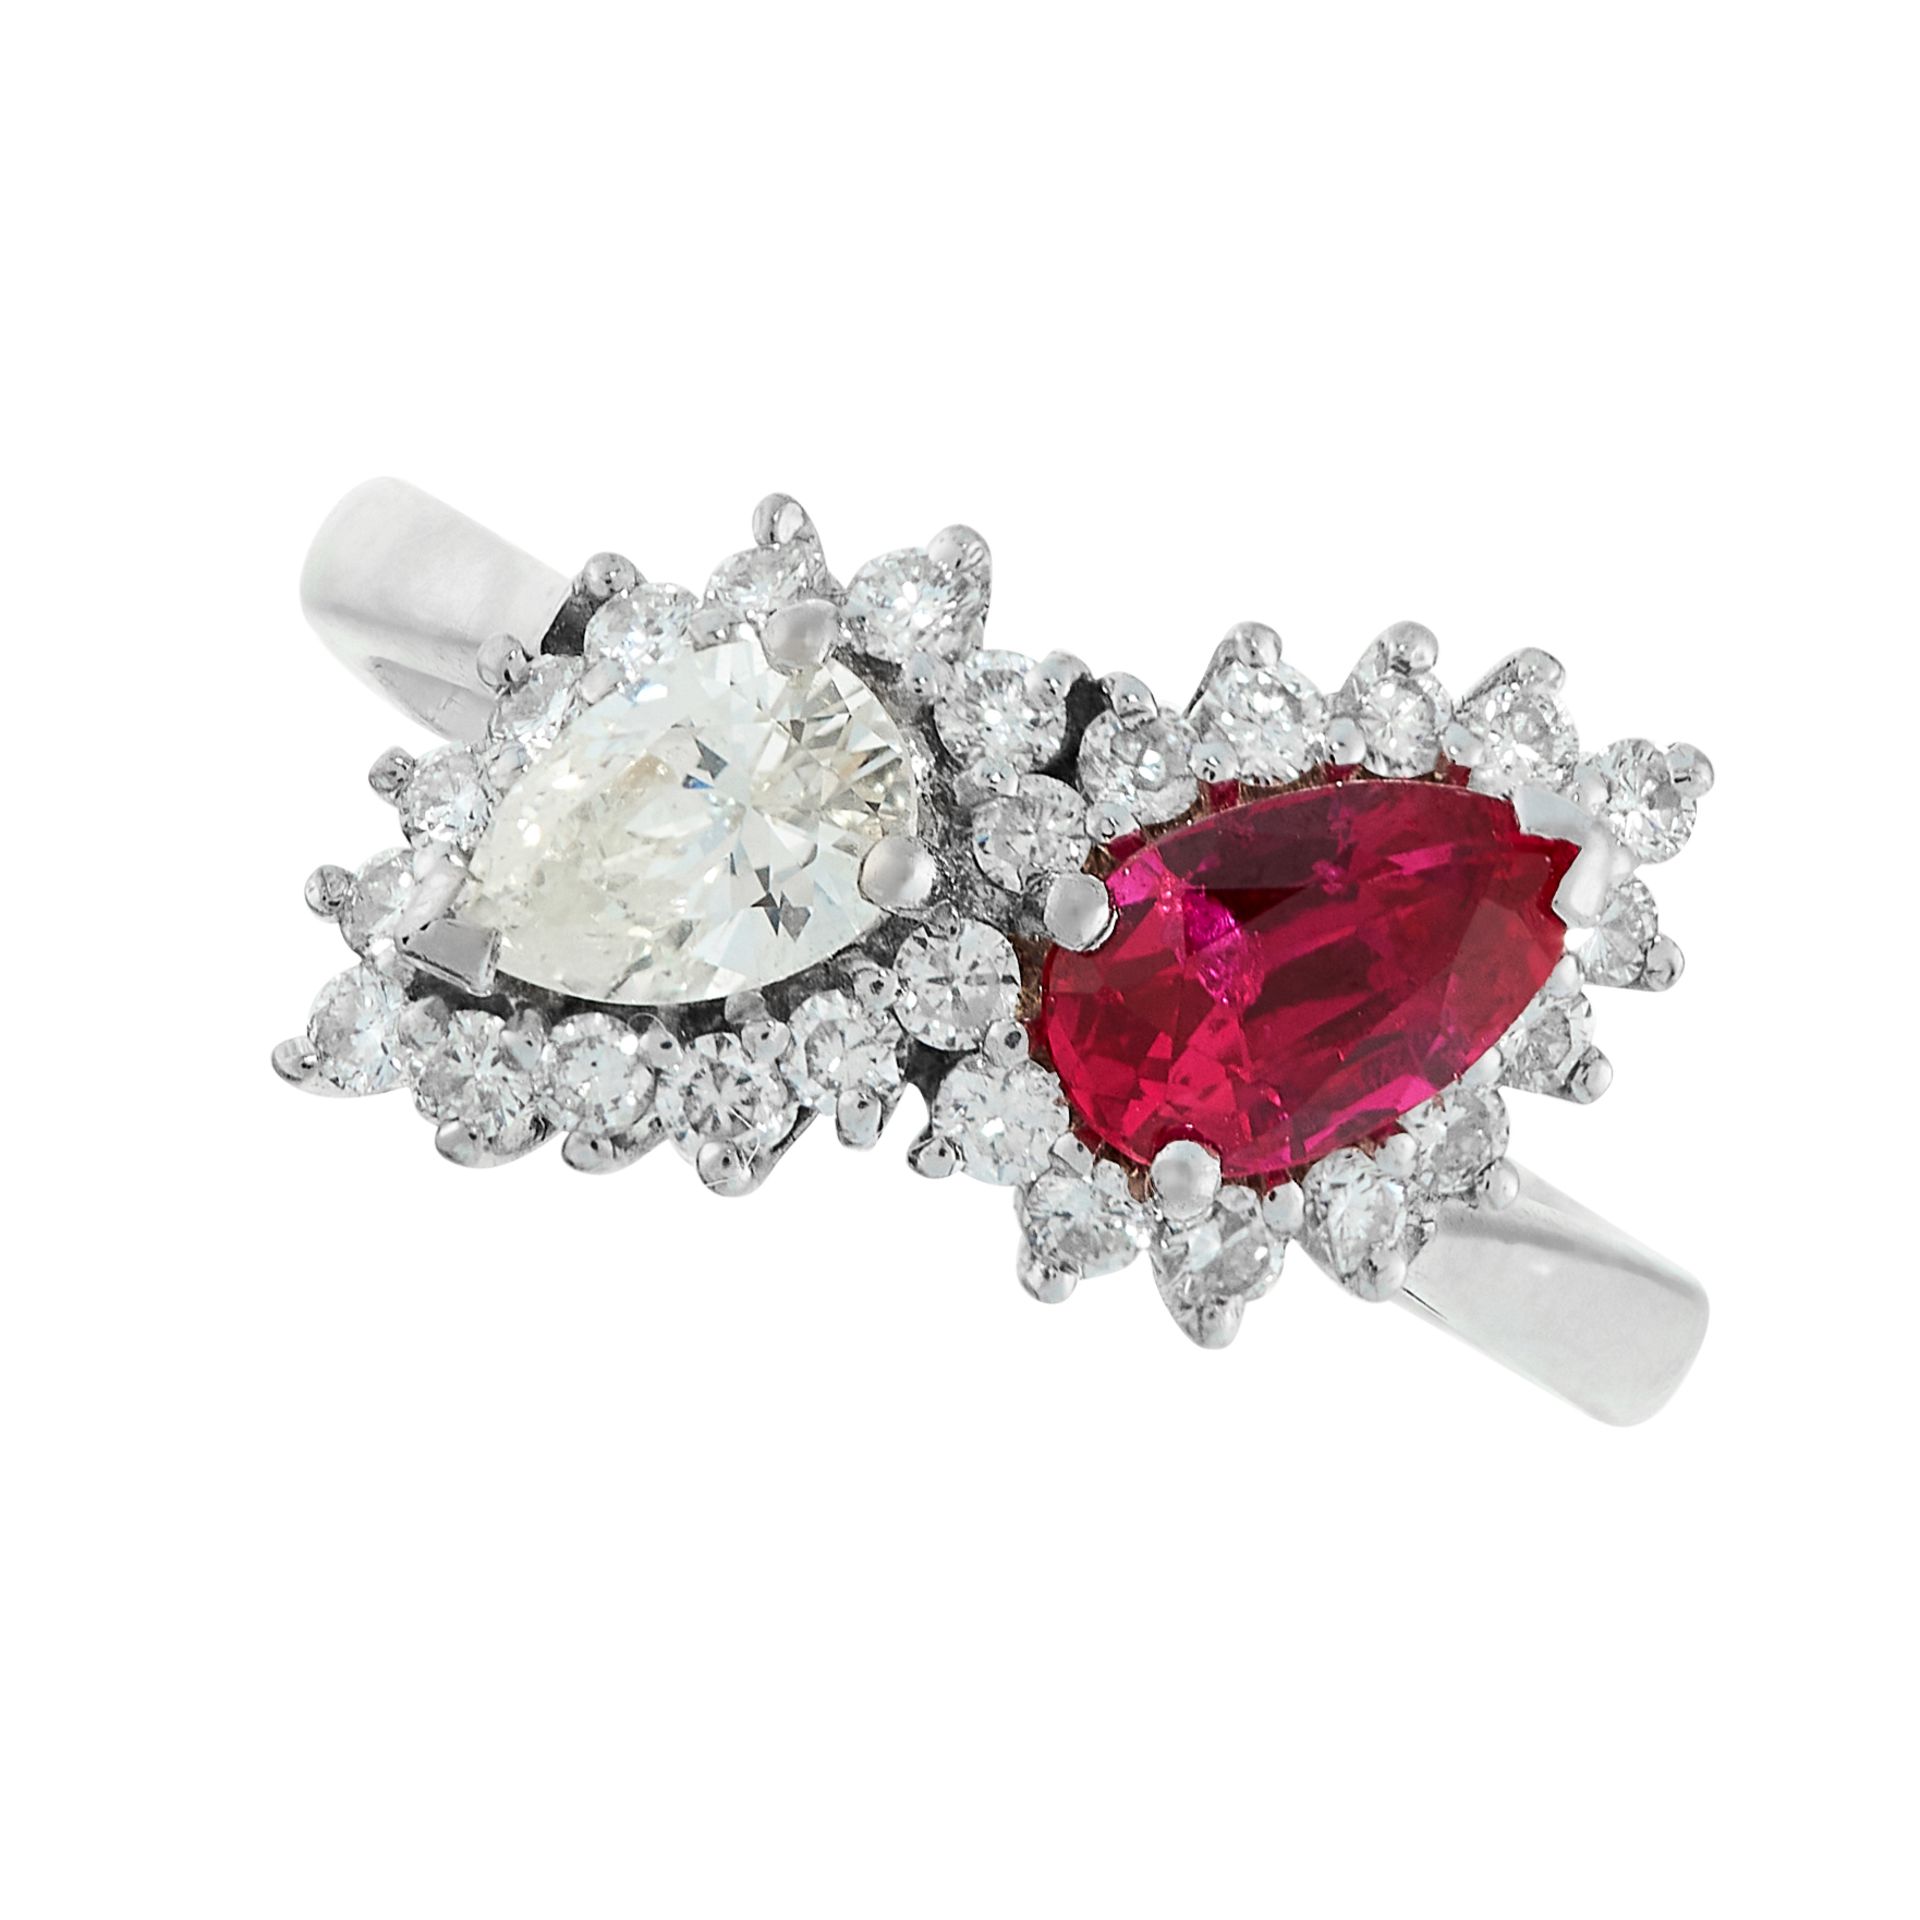 RUBY AND DIAMOND TOI ET MOI RING in 18ct white gold, set alternately with a pear cut ruby of 0.67